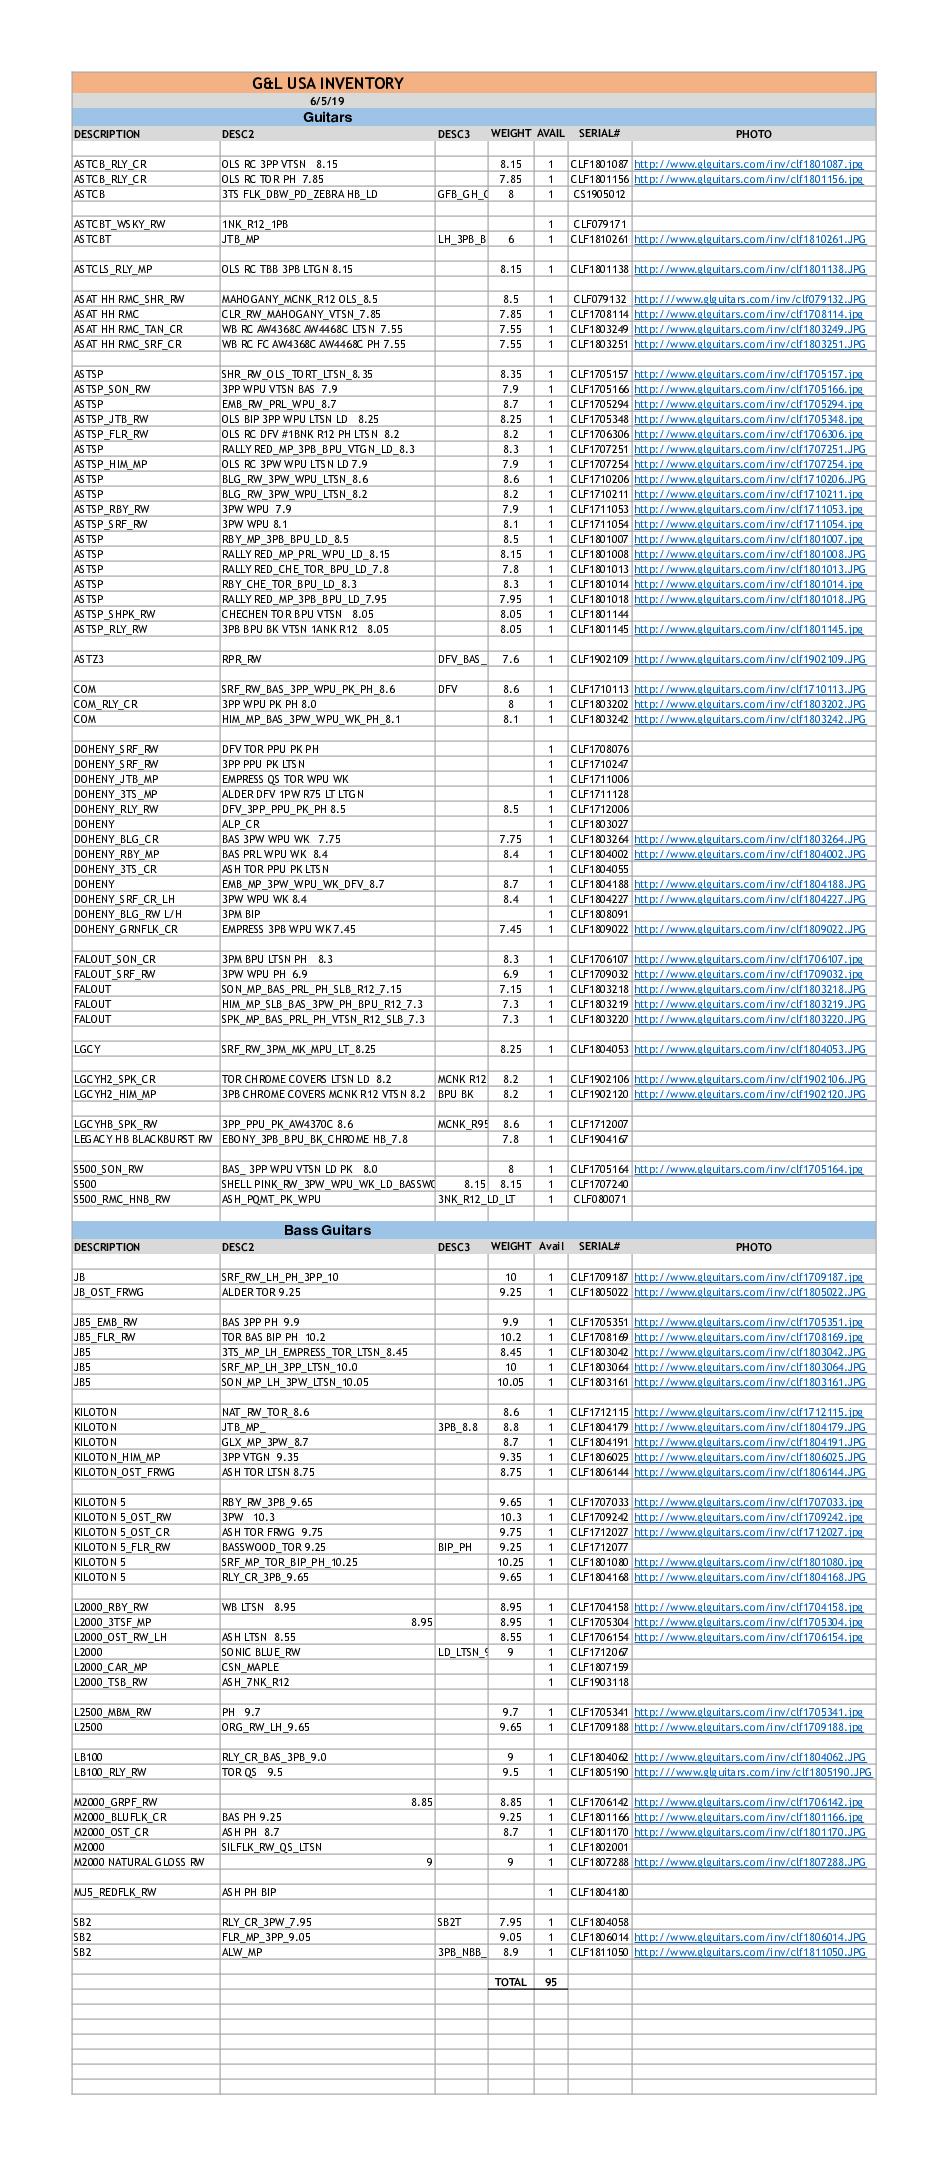 G&L Inventory-06/06/2019 (PDF) - with Option Codes